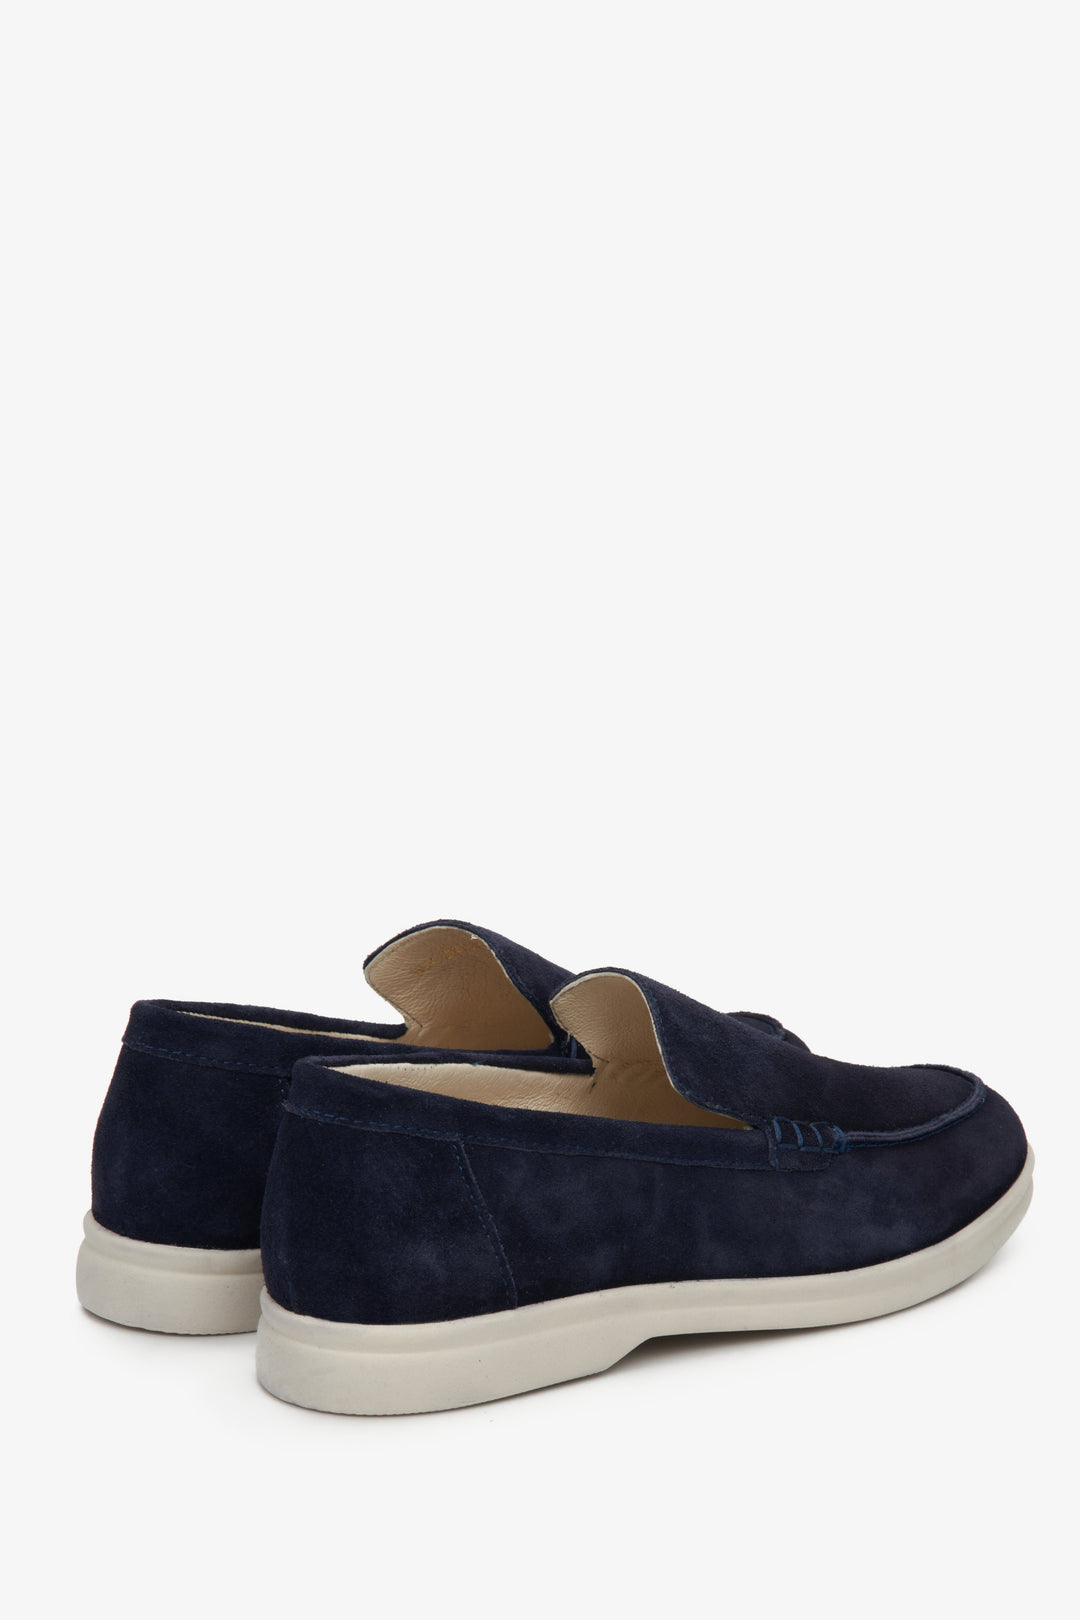 Women's suede moccasins in navy blue Estro - close-up of the heel and side seam of the shoes.